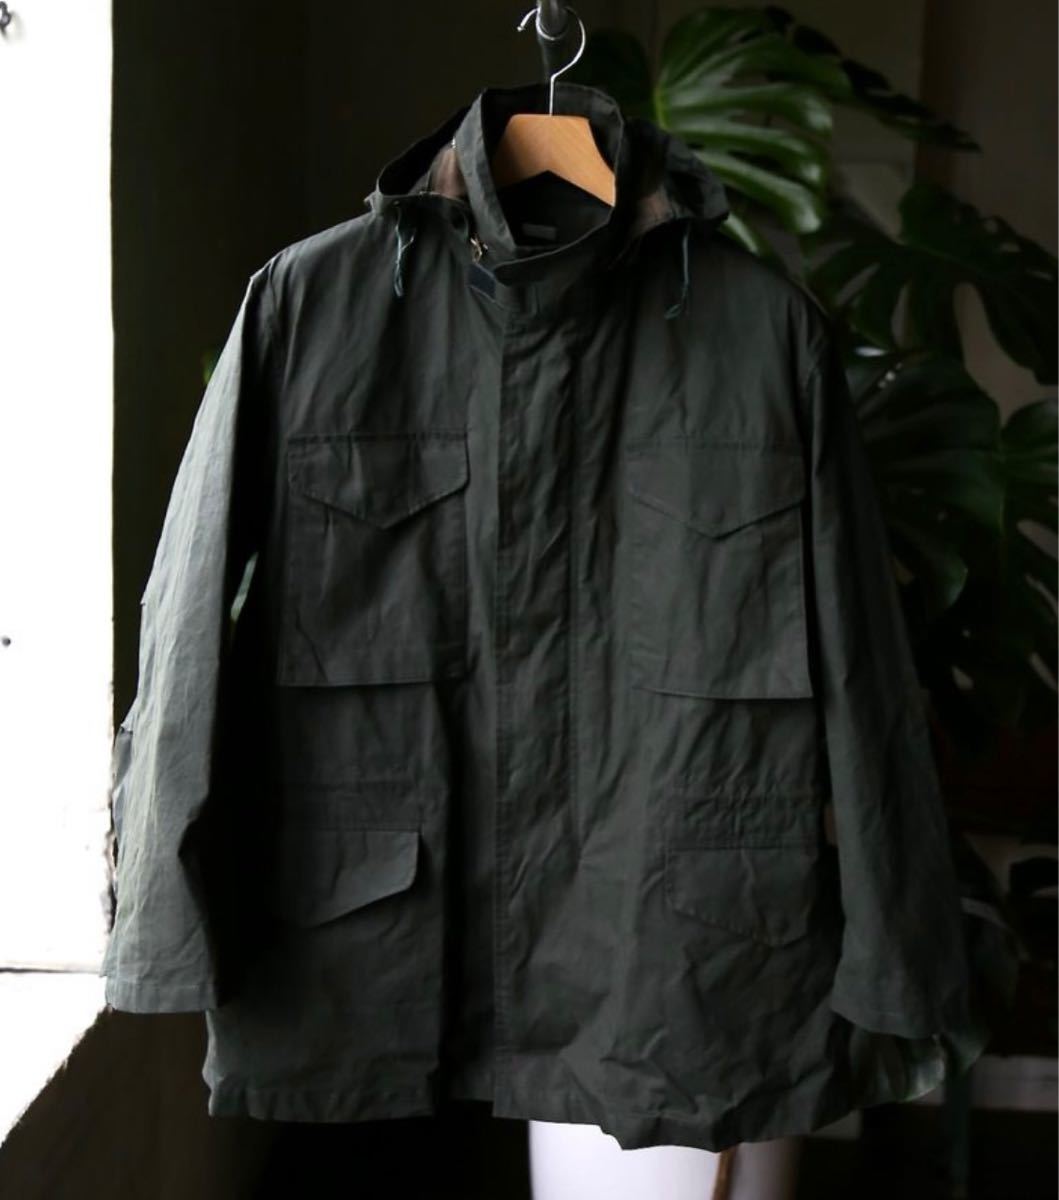 【A.PRESSE】新品 定価以下 22aw アプレッセ M-65 Field Jacket(21AAP-01-06M)D.GREEN army